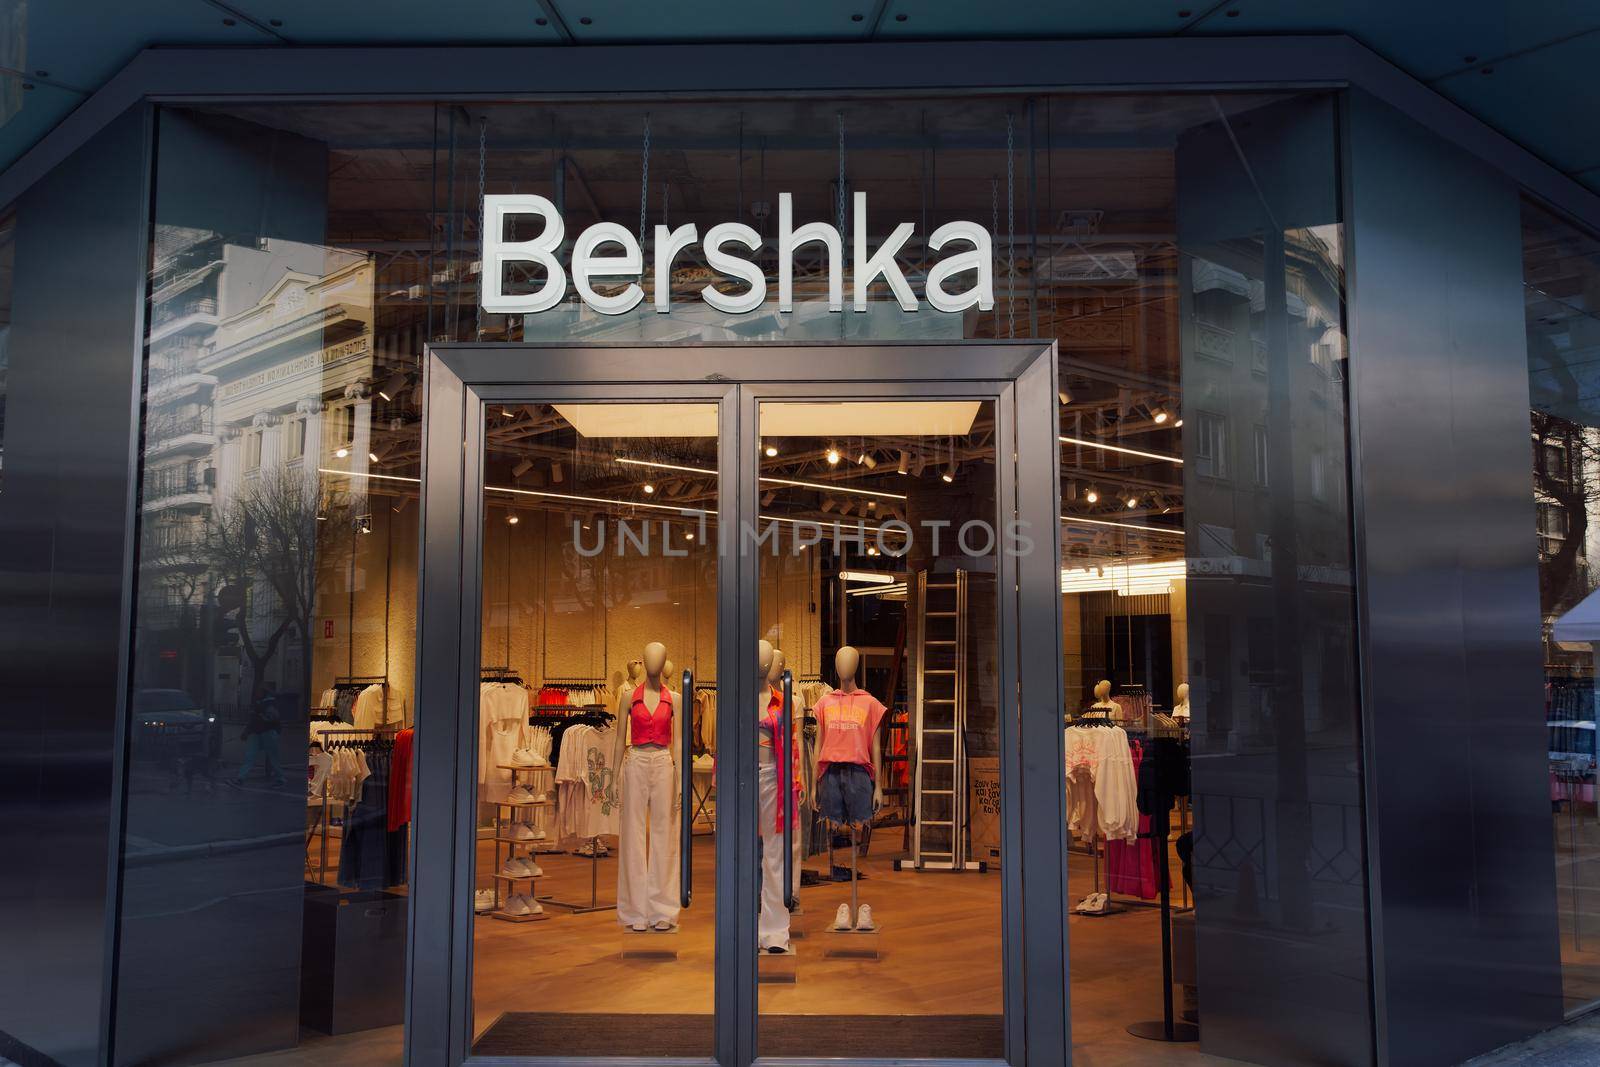 Spanish clothes & accessories brand owned by Inditex, trading worldwide store view with clothing at Tsimiski street in Thessaloniki, Greece.